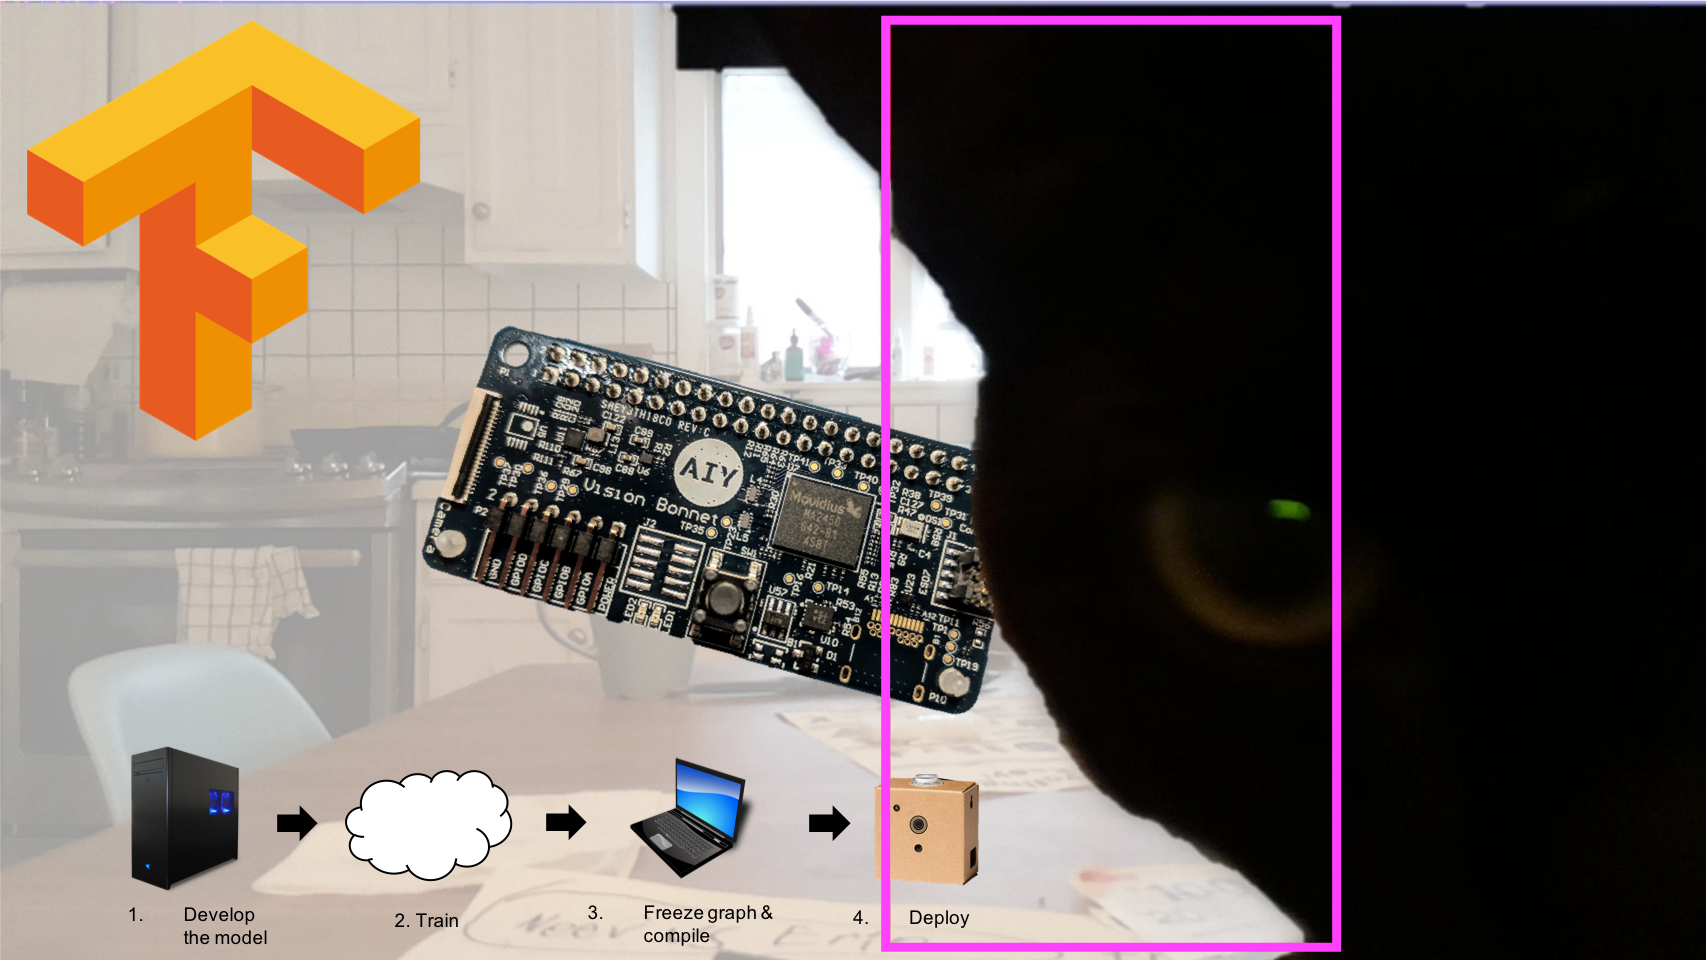 Computer Vision Training, the AIY Vision Kit, and Cats